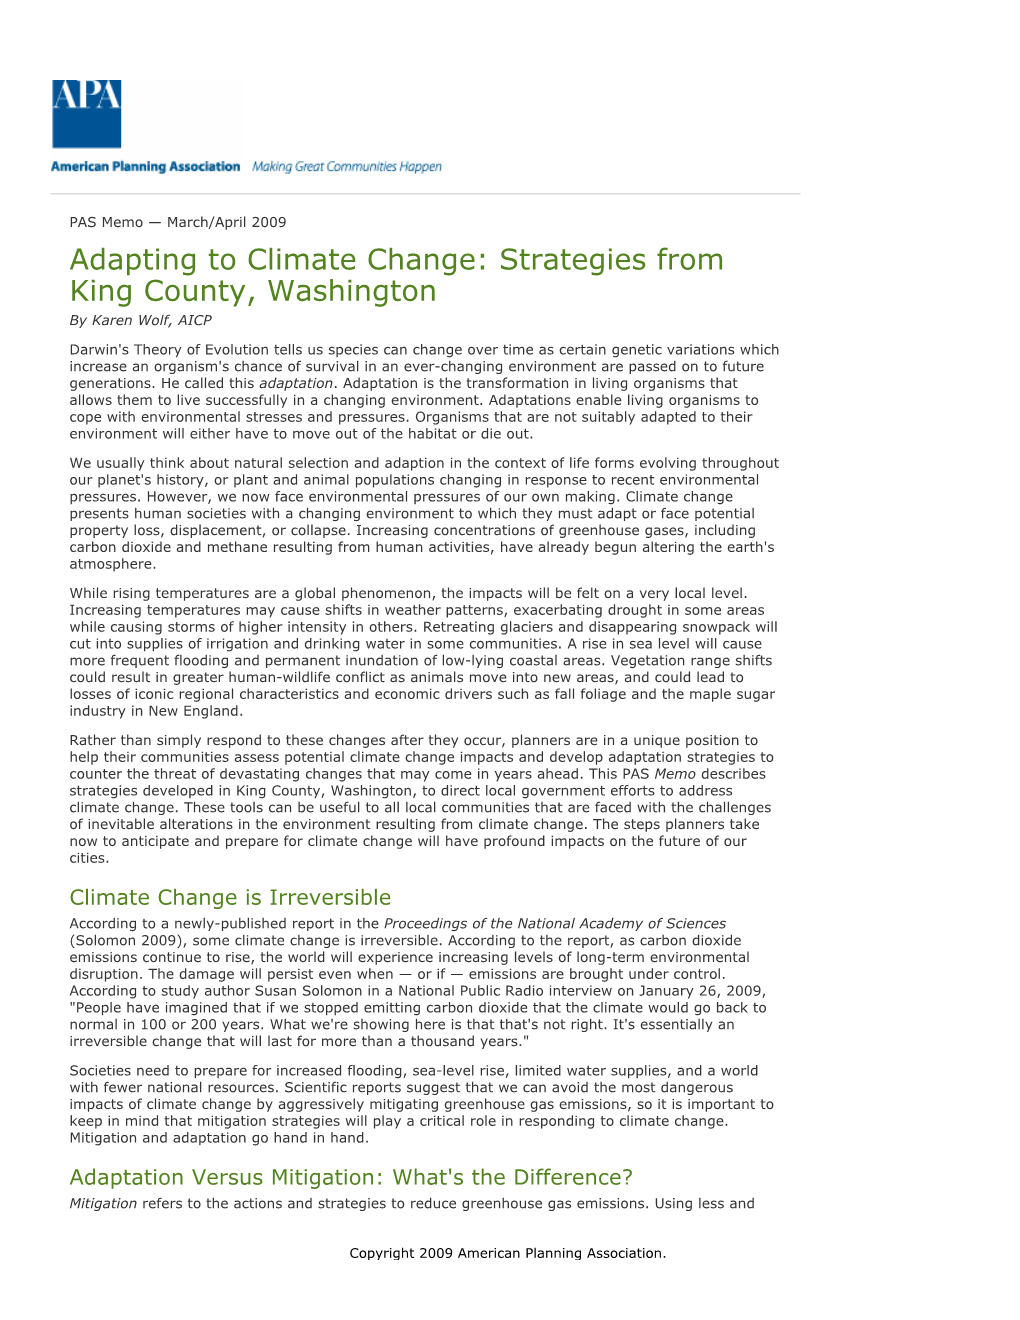 Adapting to Climate Change: Strategies from King County, Washington by Karen Wolf, AICP